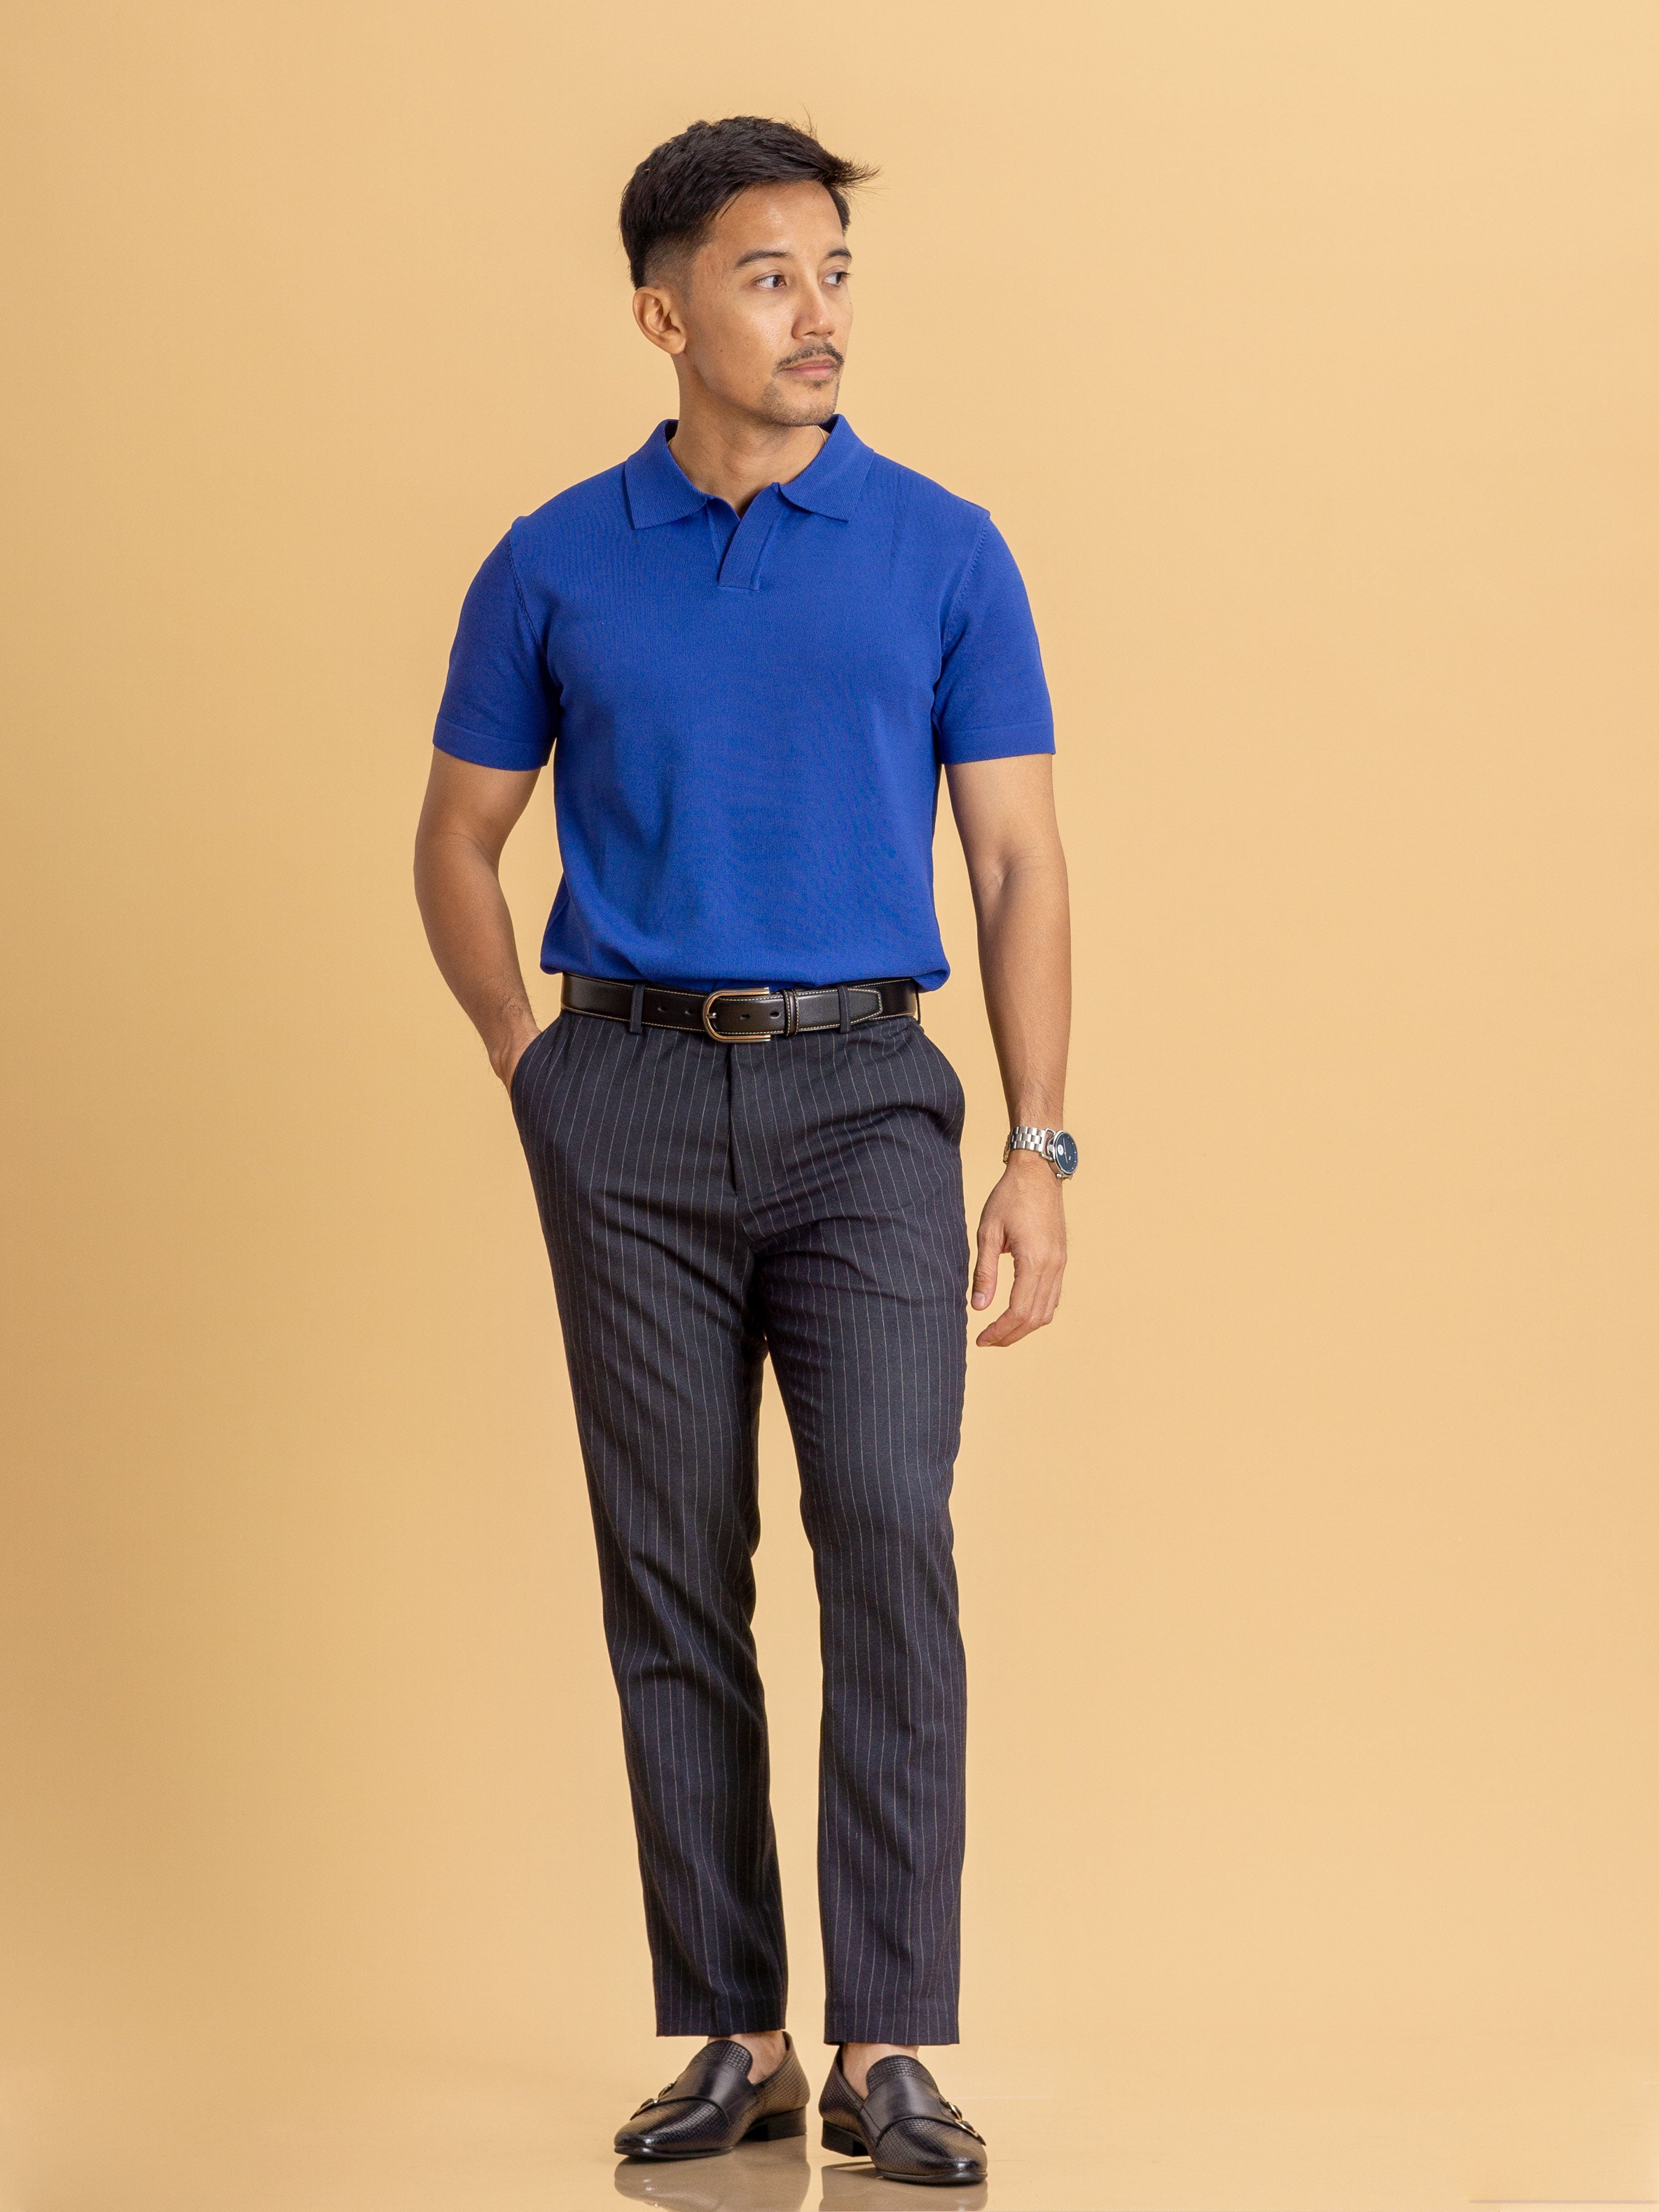 Knit Polo Tee - Royal Blue Open Collar - Zeve Shoes